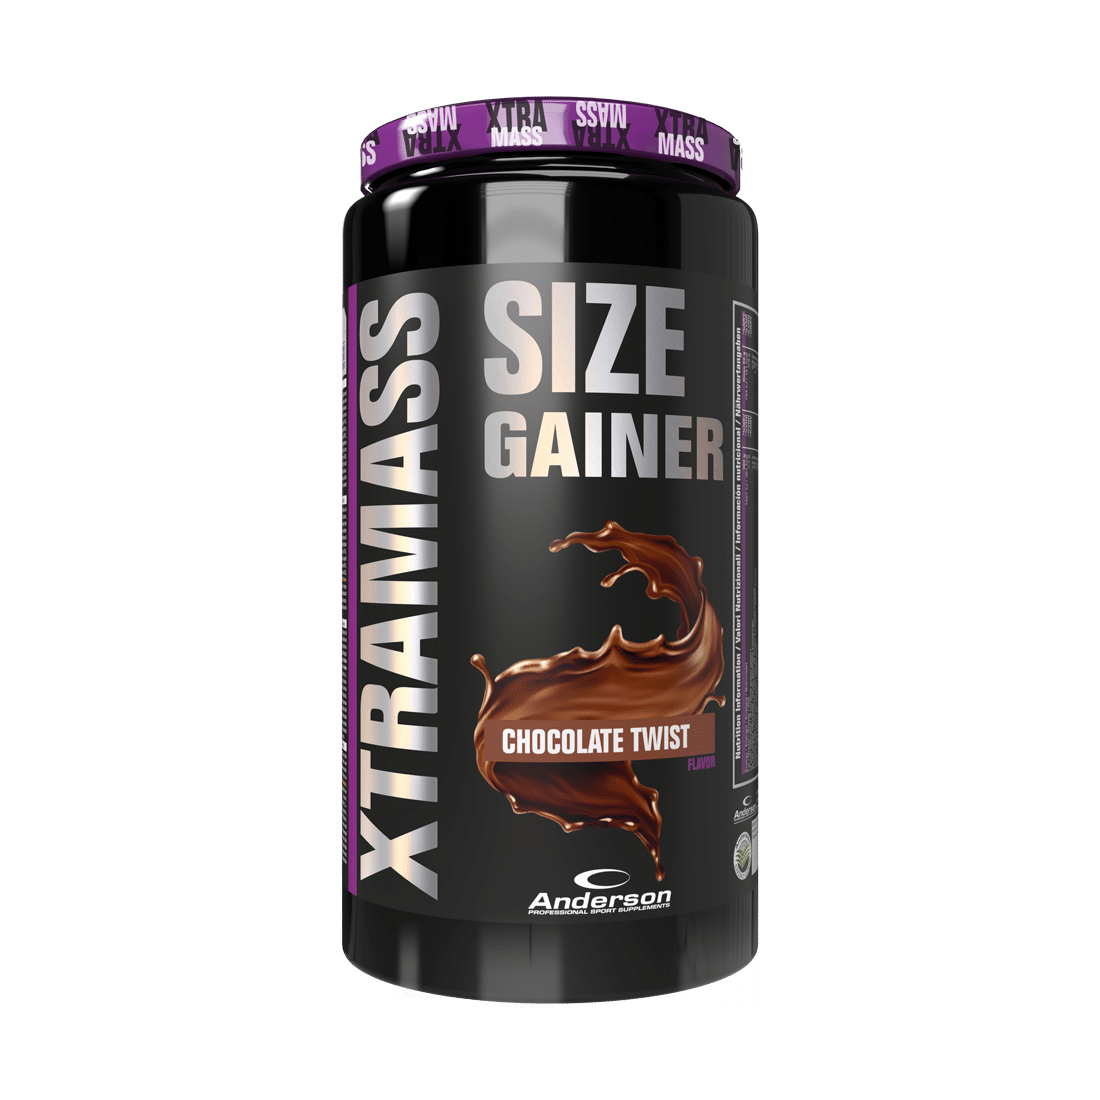 XTRA MASS SIZE GAINER 1.1 KG